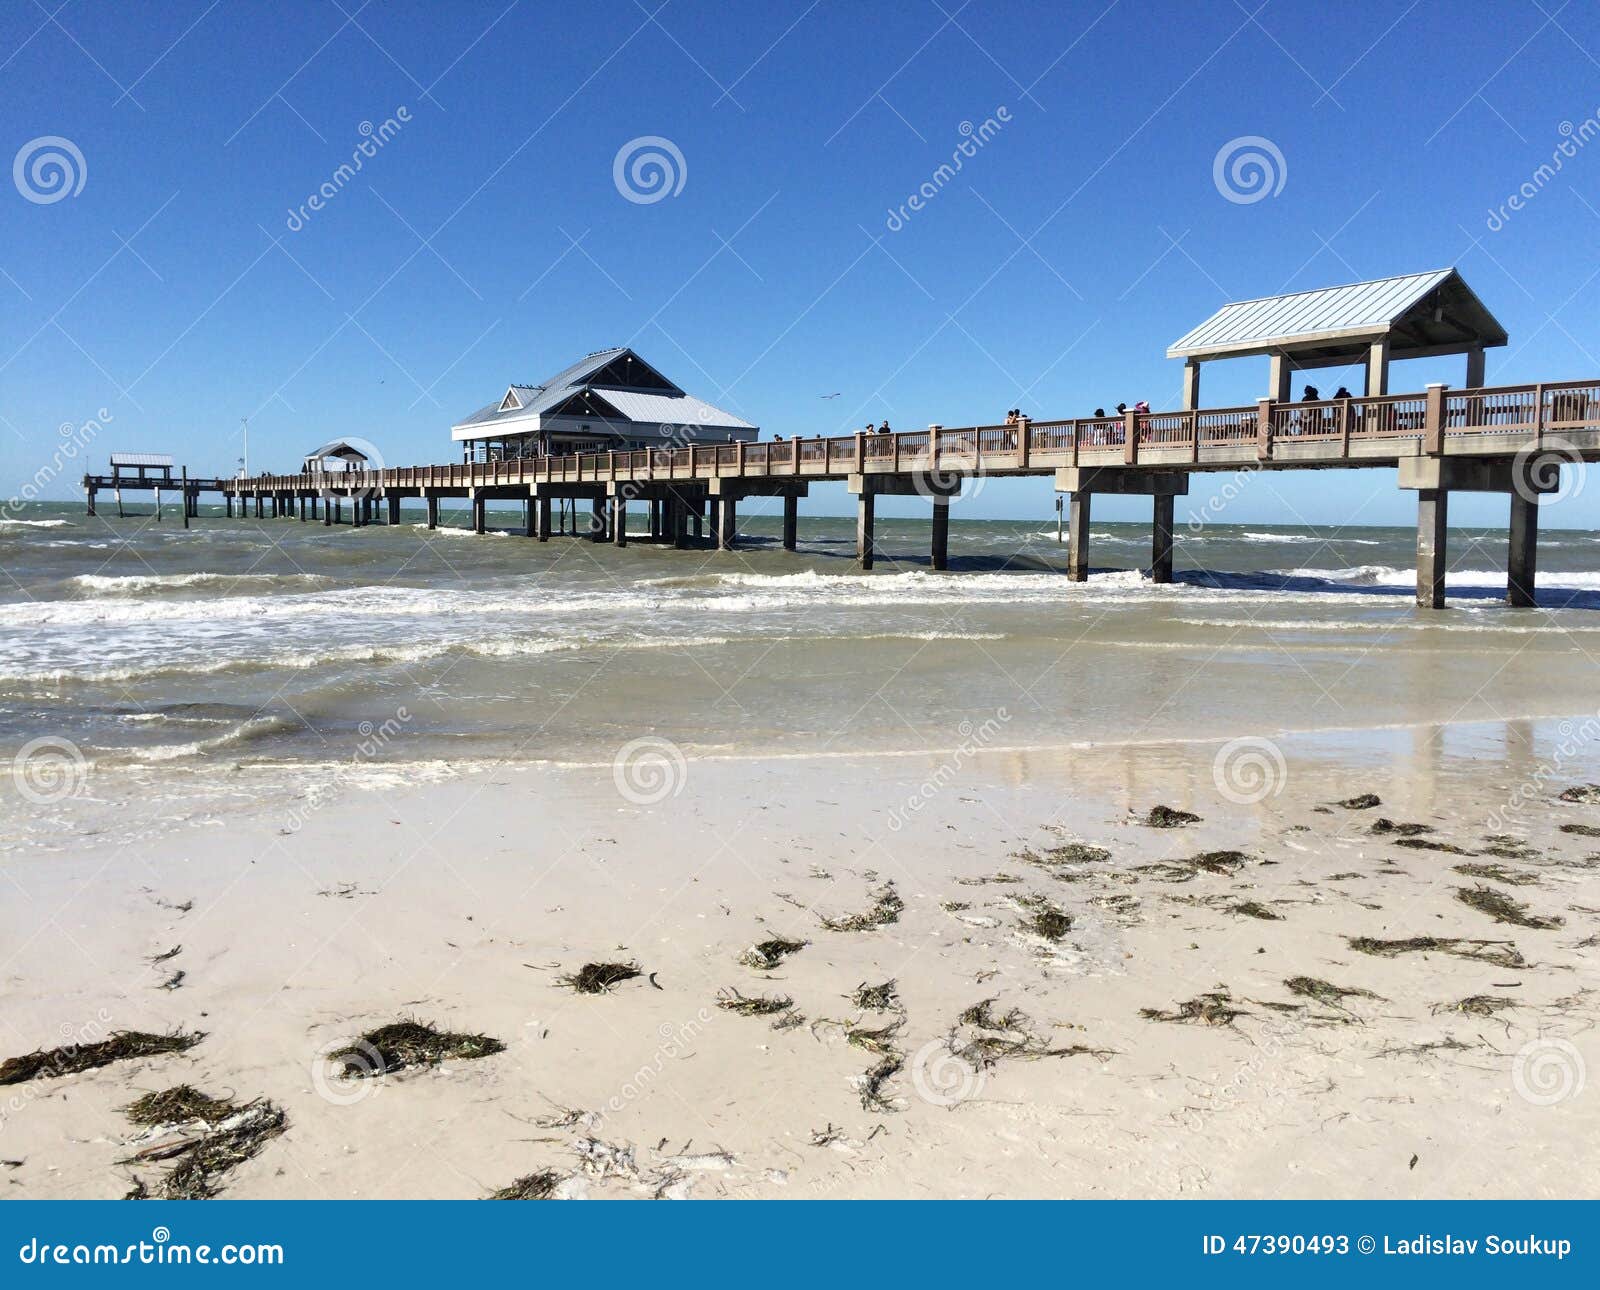 pier 60, clearwater, florida